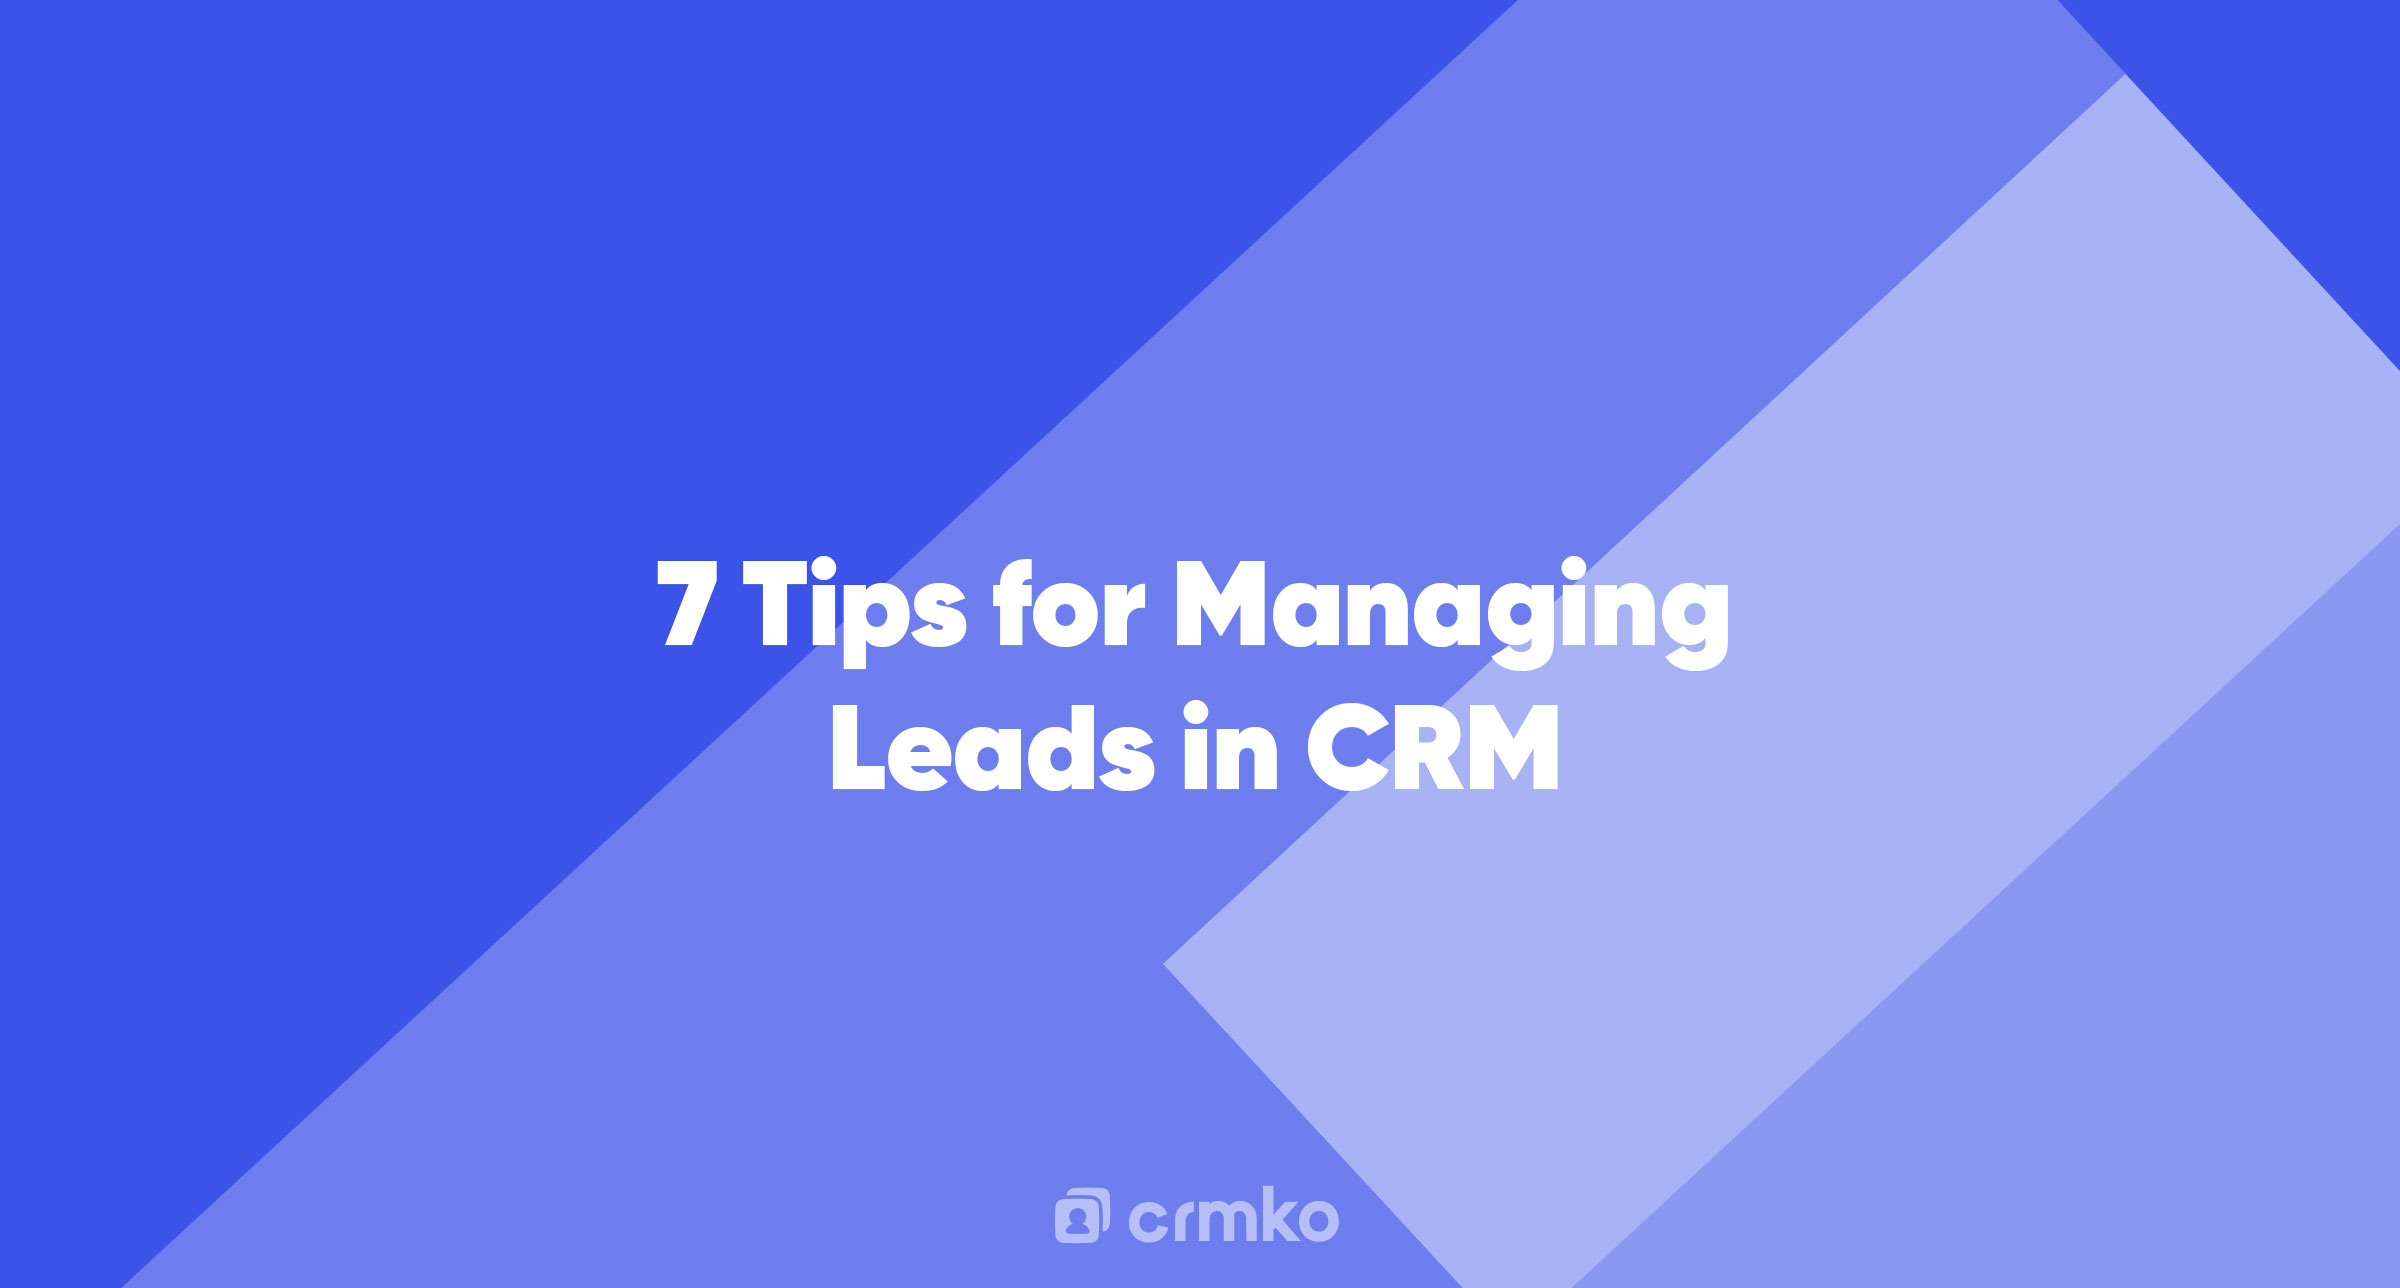 Article | 7 Tips for Managing Leads in CRM